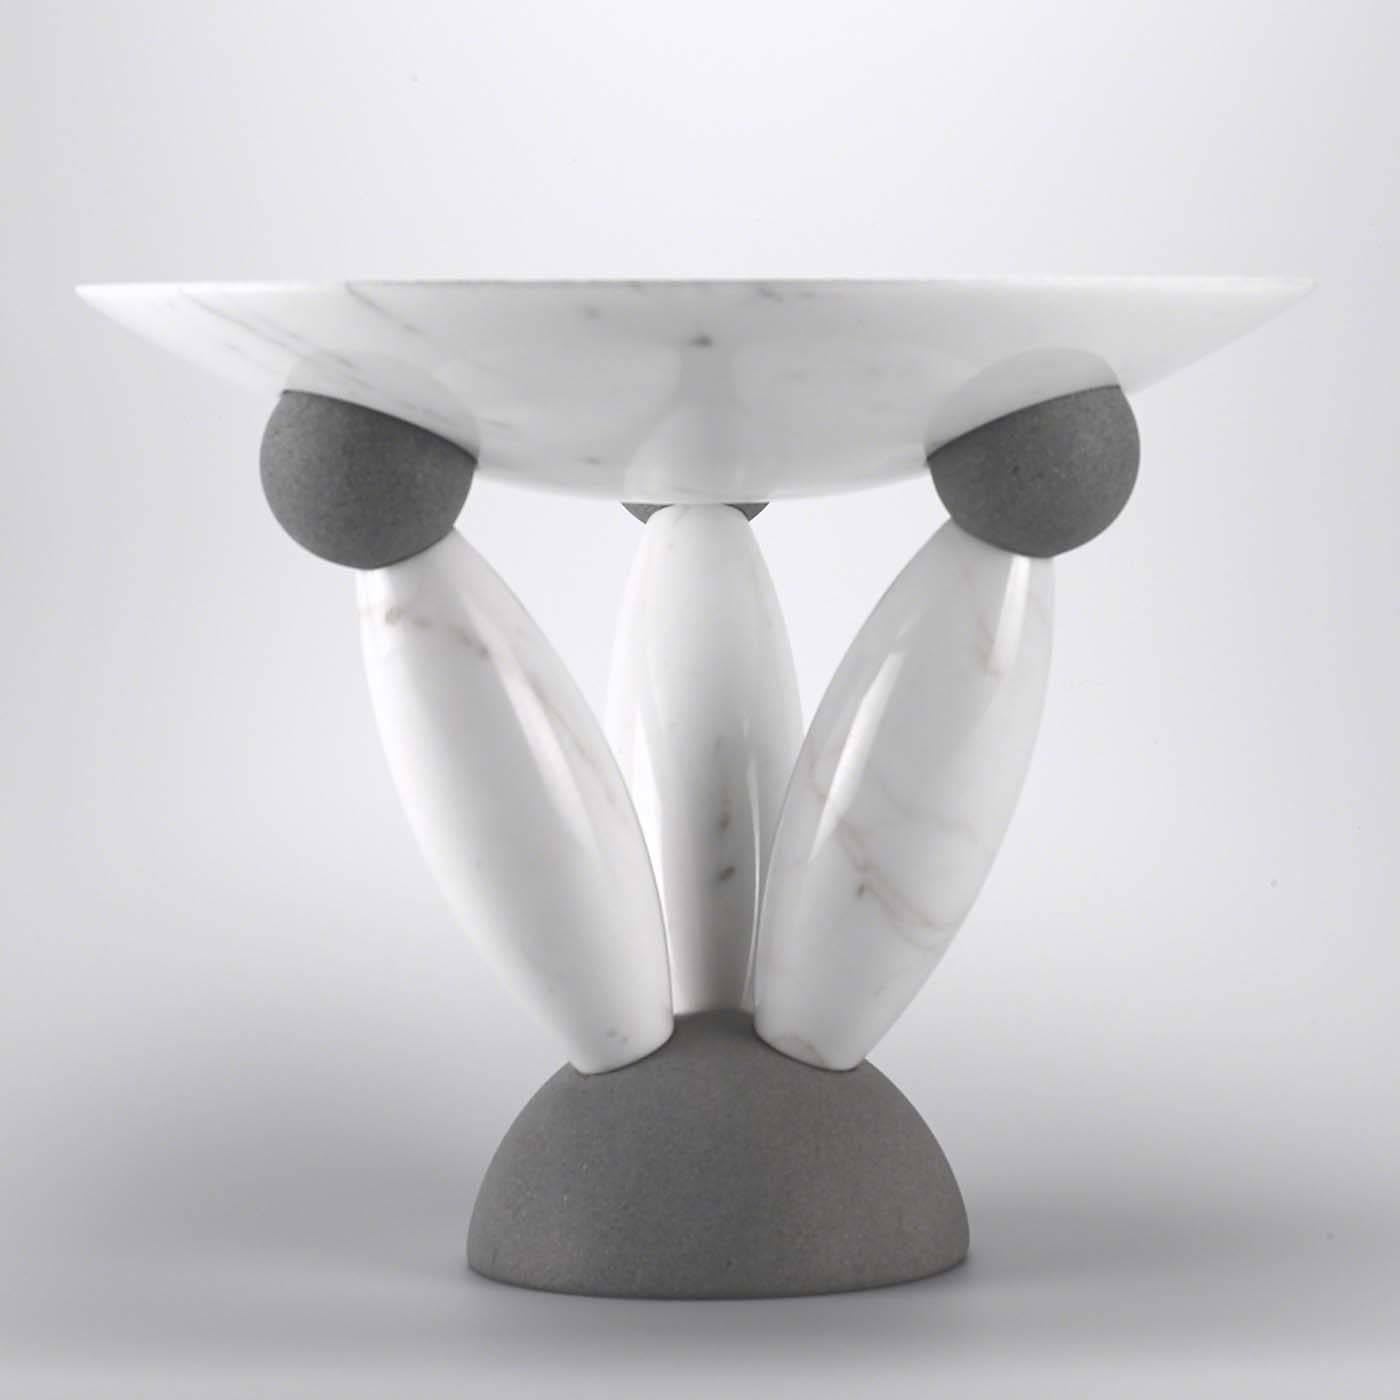 This unique bowl was designed by Matteo Thun and makes a statement whether used for holding fruit or as an outstanding display piece. Made of the highest quality Italian natural stone, it features a shallow bowl in white marble atop a sculptural,